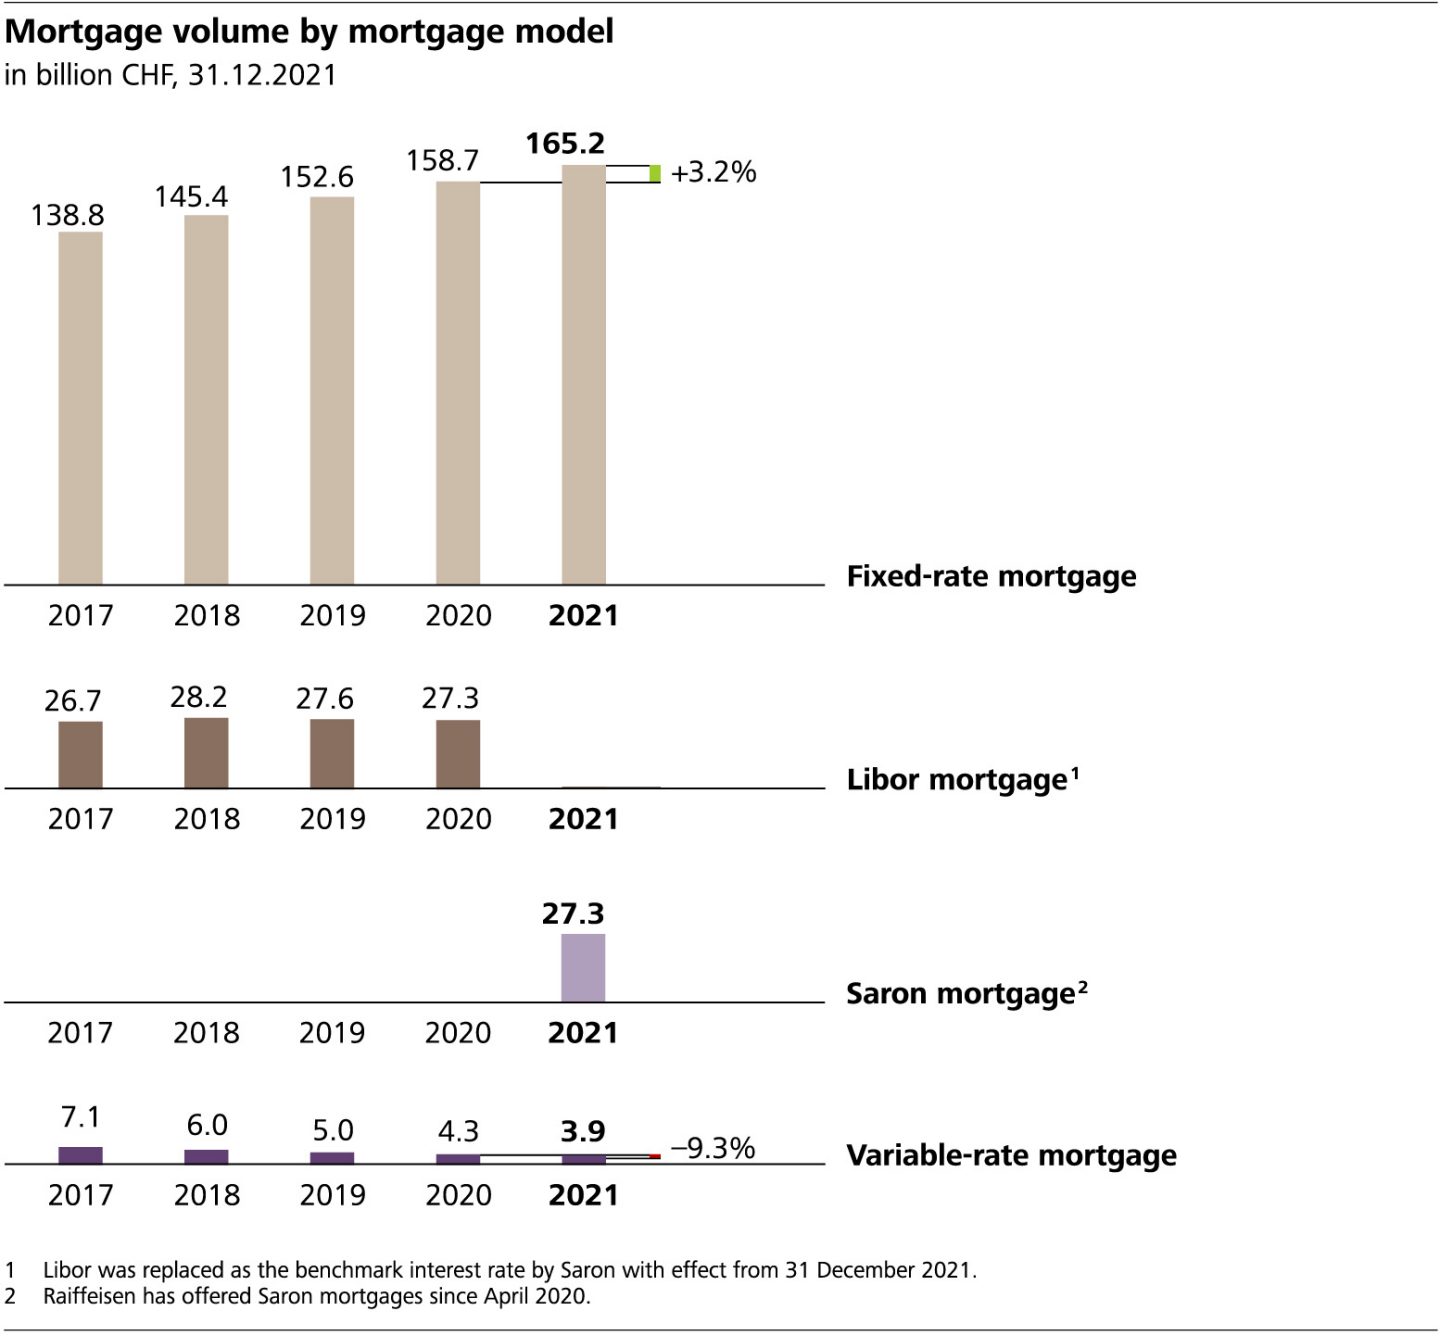 Mortgage volume by mortgage model